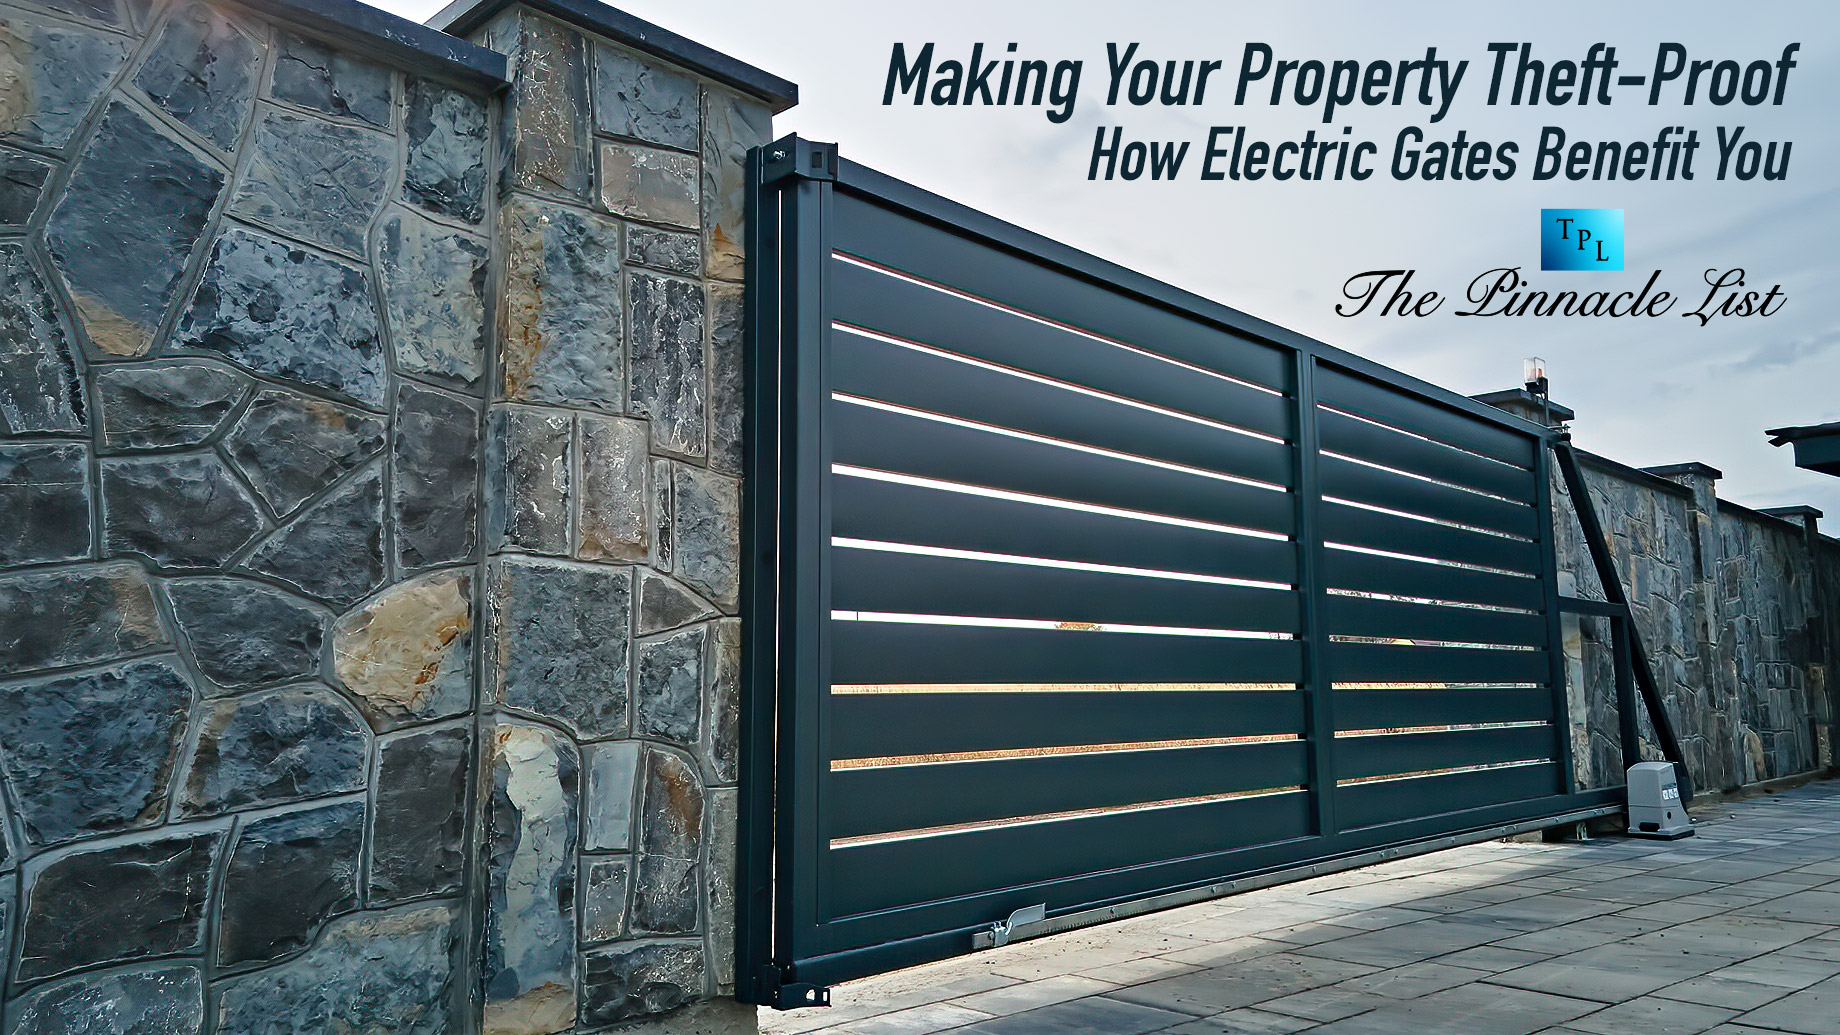 Making Your Property Theft-Proof: How Electric Gates Benefit You